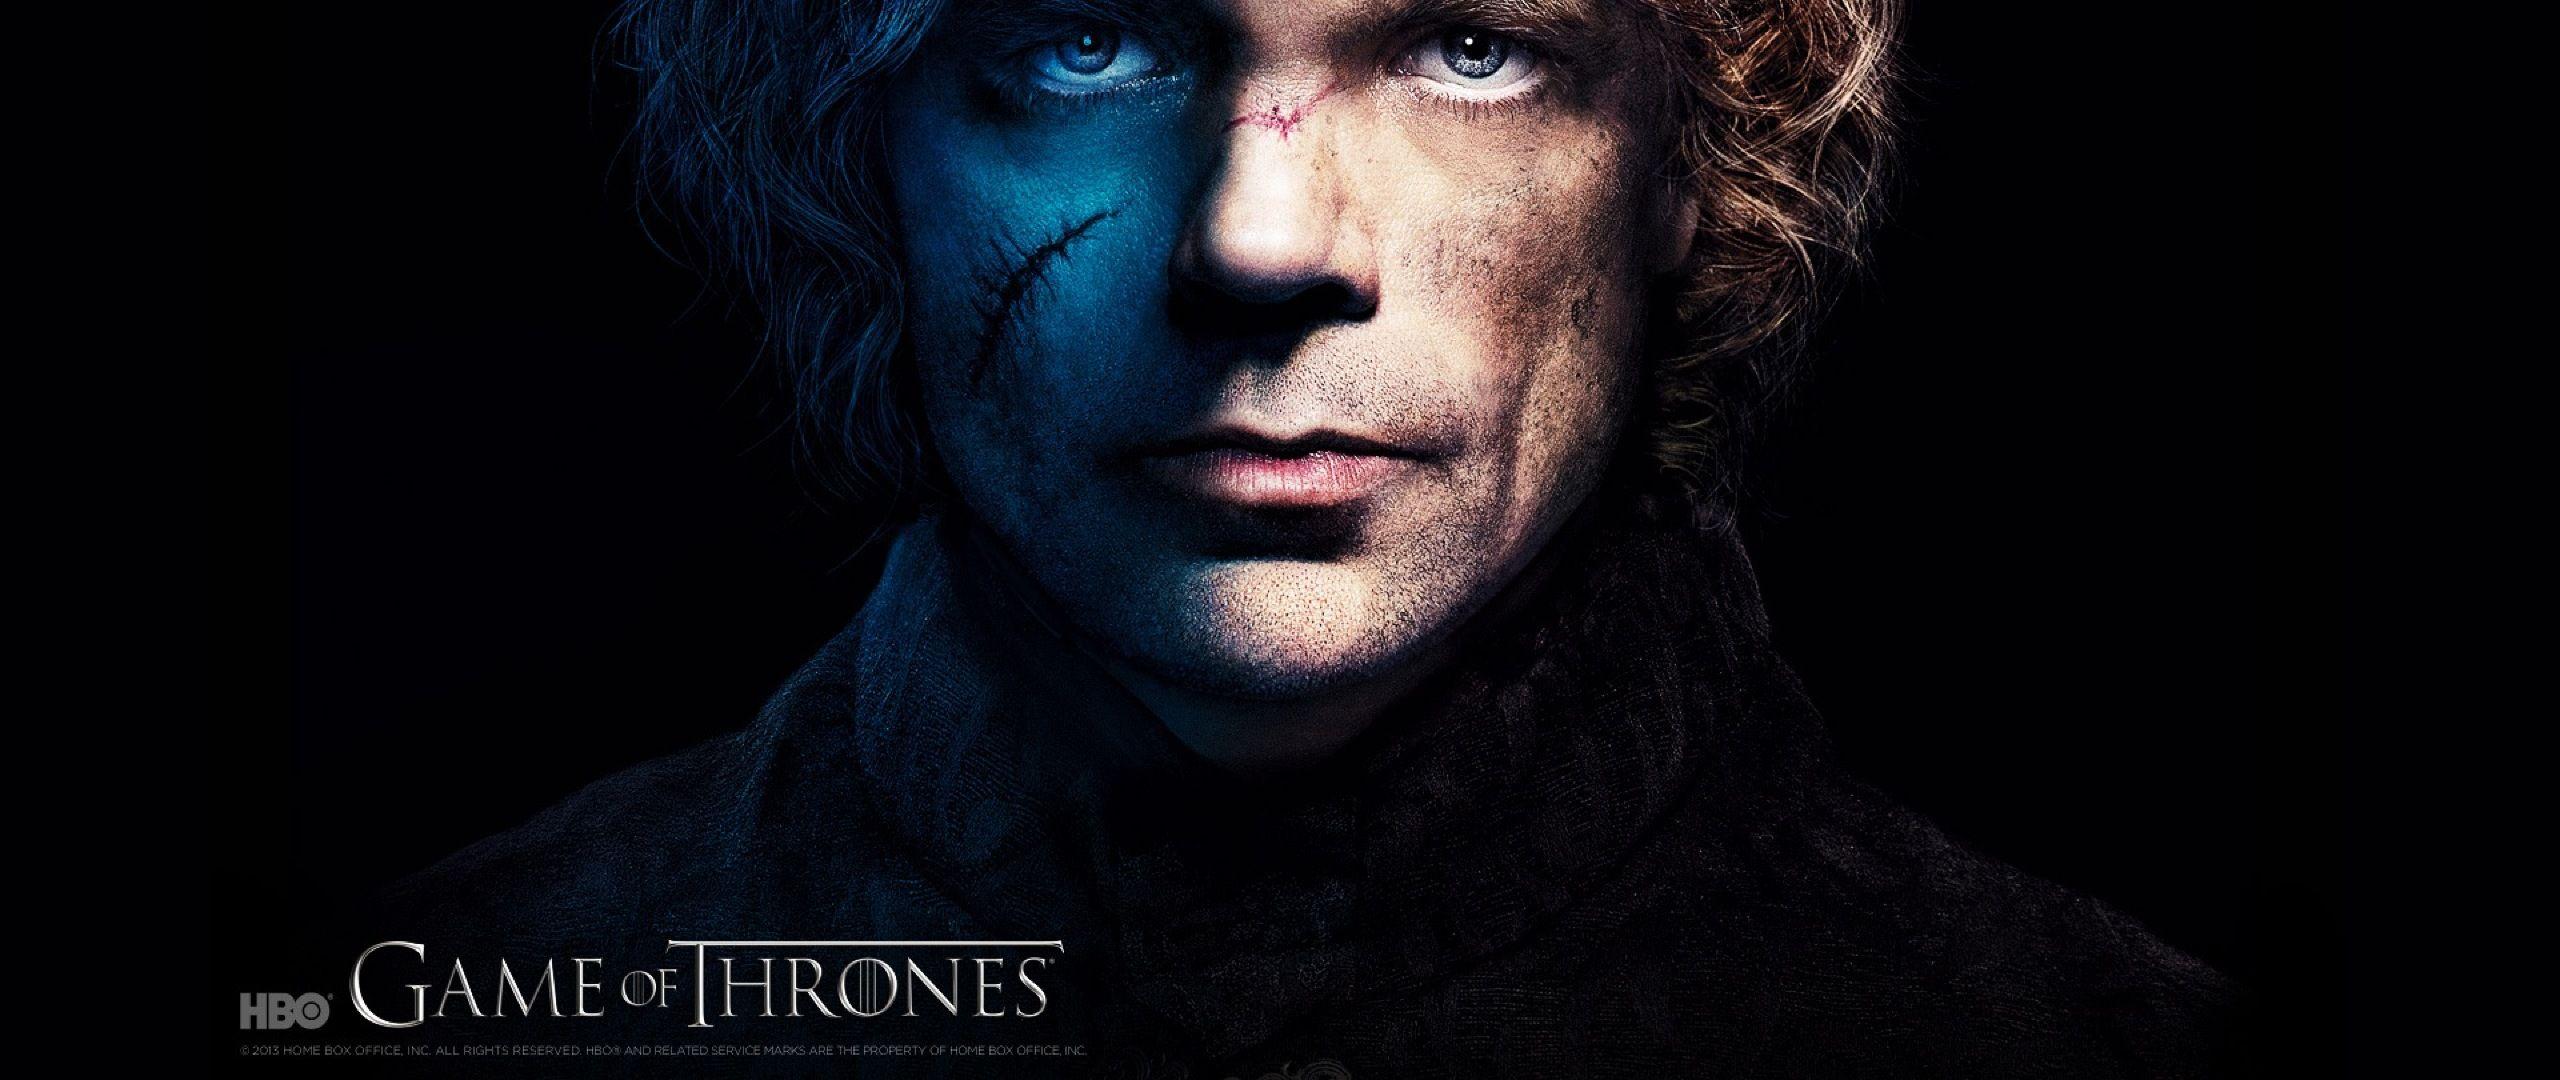 Download Game Of Thrones, Peter Dinklage, Tyrion Lannister 2560x1080